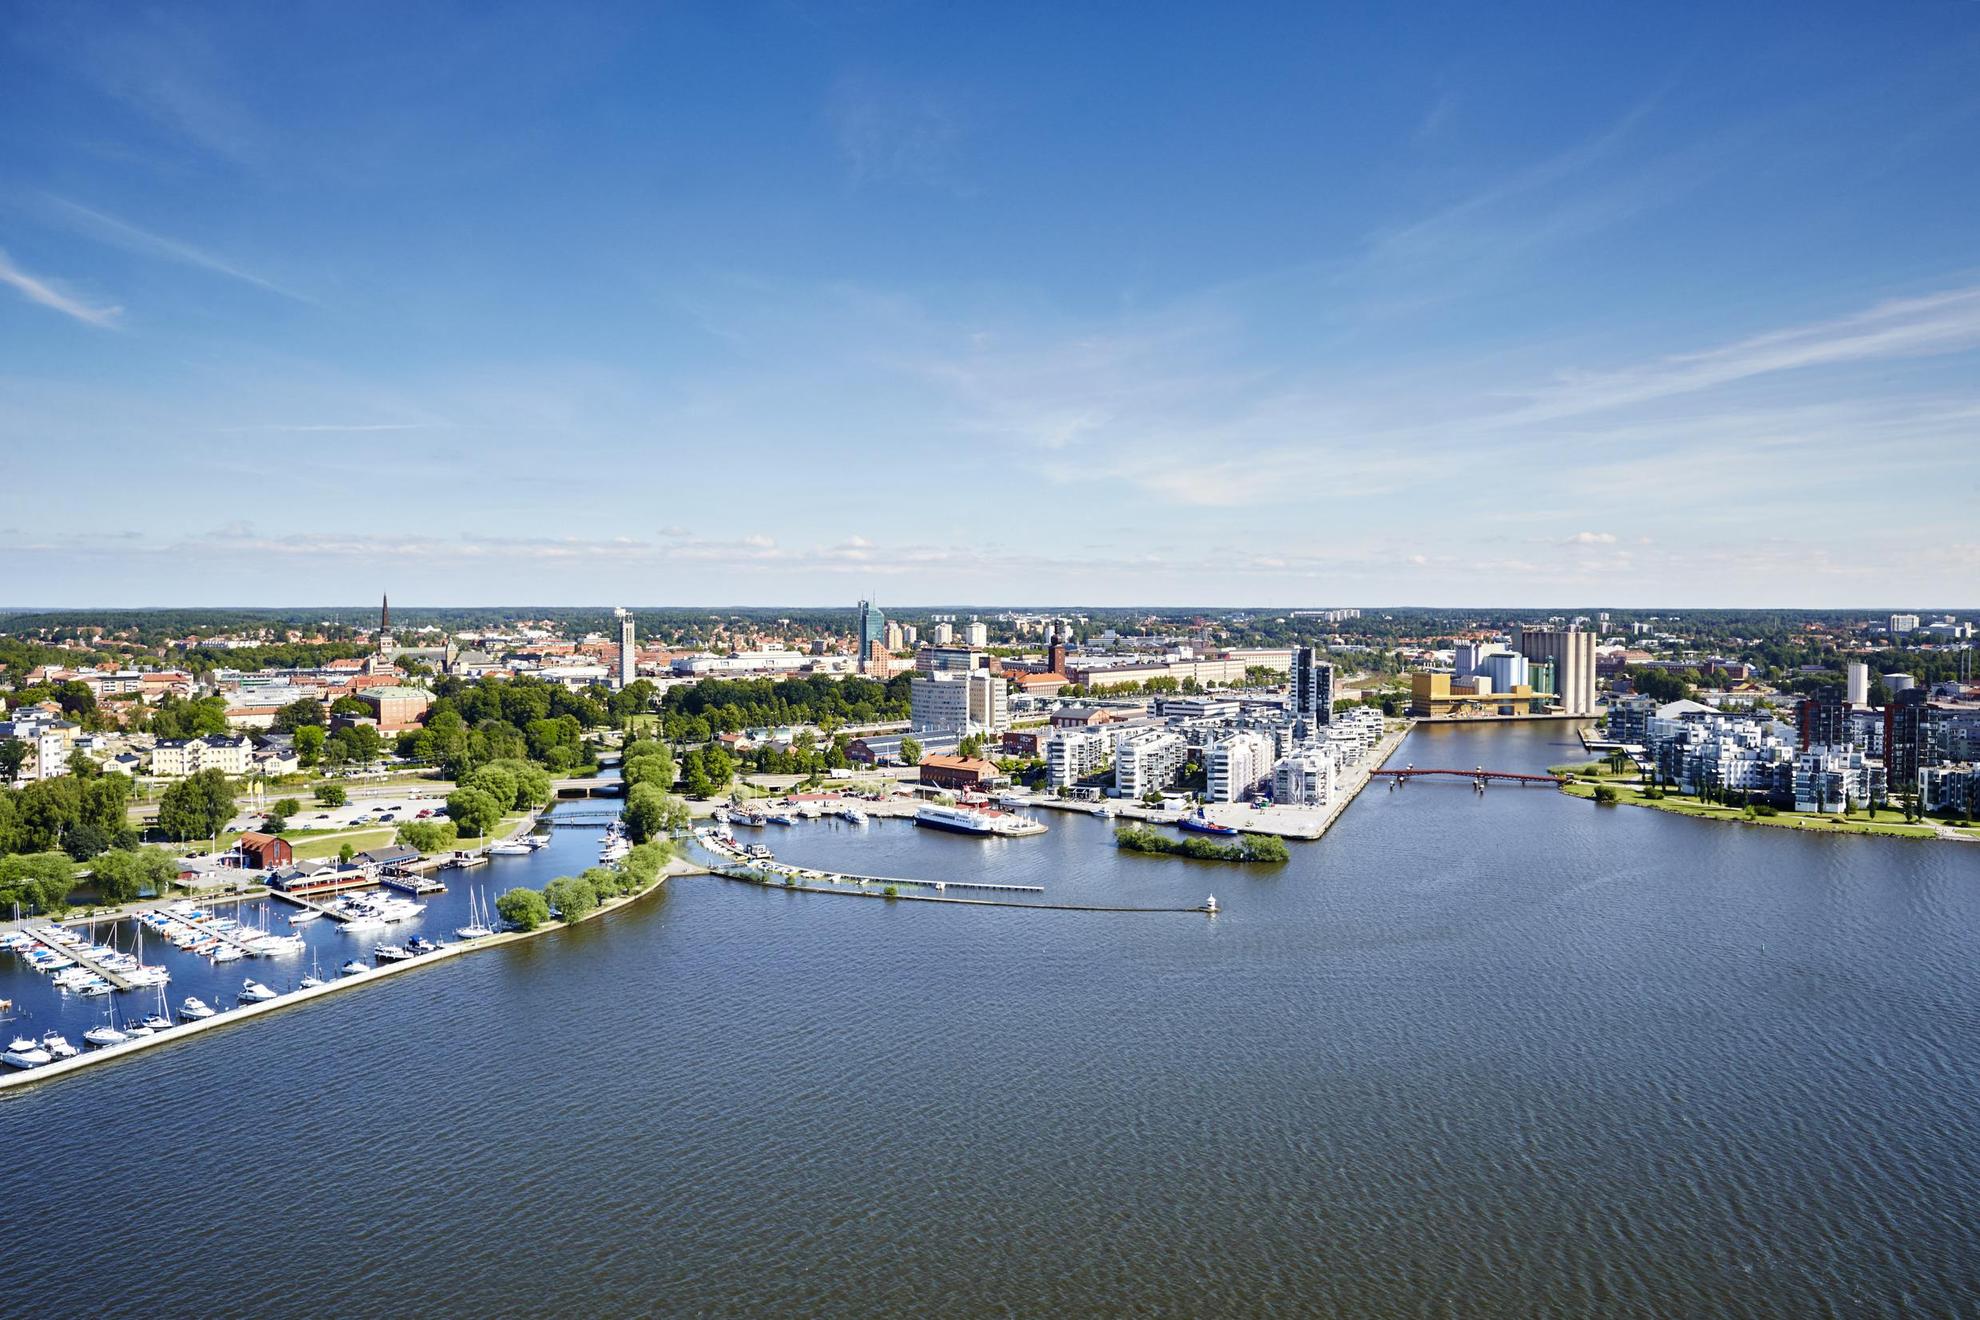 An aerial image of Västerås during summer next to the water.